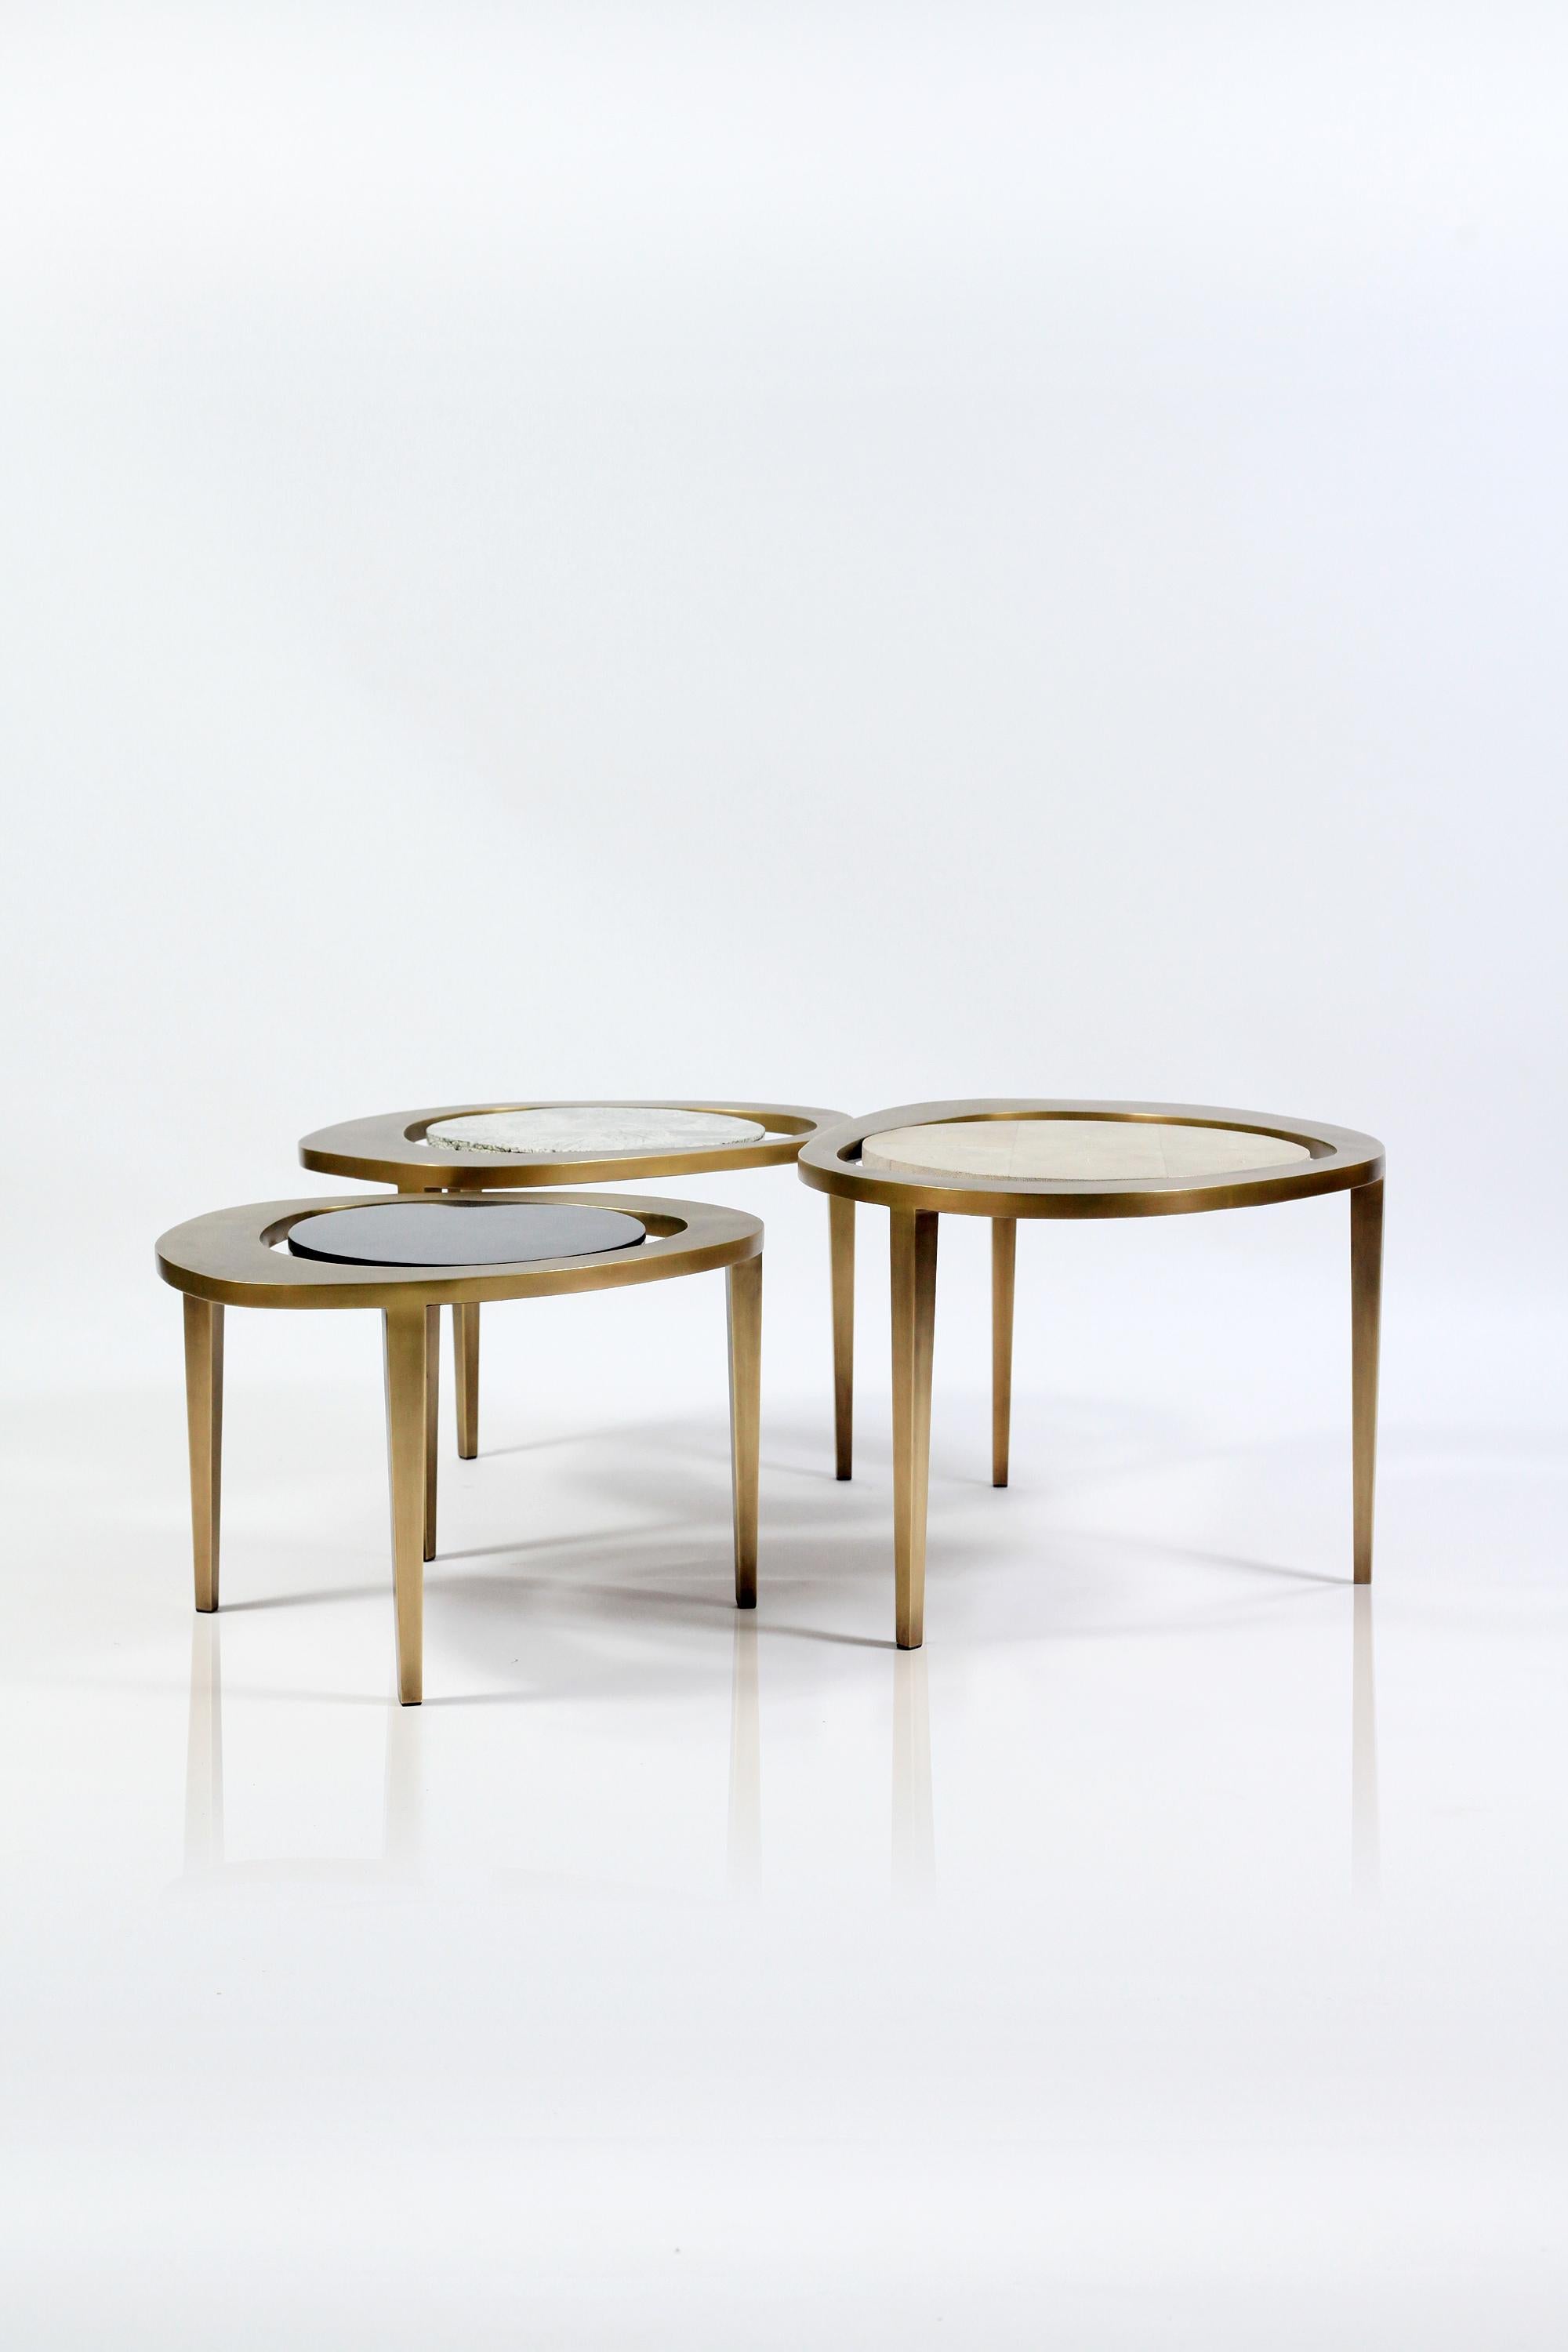 The Peacock nesting coffee table small is an iconic R&Y Augousti piece and one of their first designs. The piece both Minimalist and sculptural, with inspiration of course from the shape of exotic peacock feathers. The top is inlaid in black pen